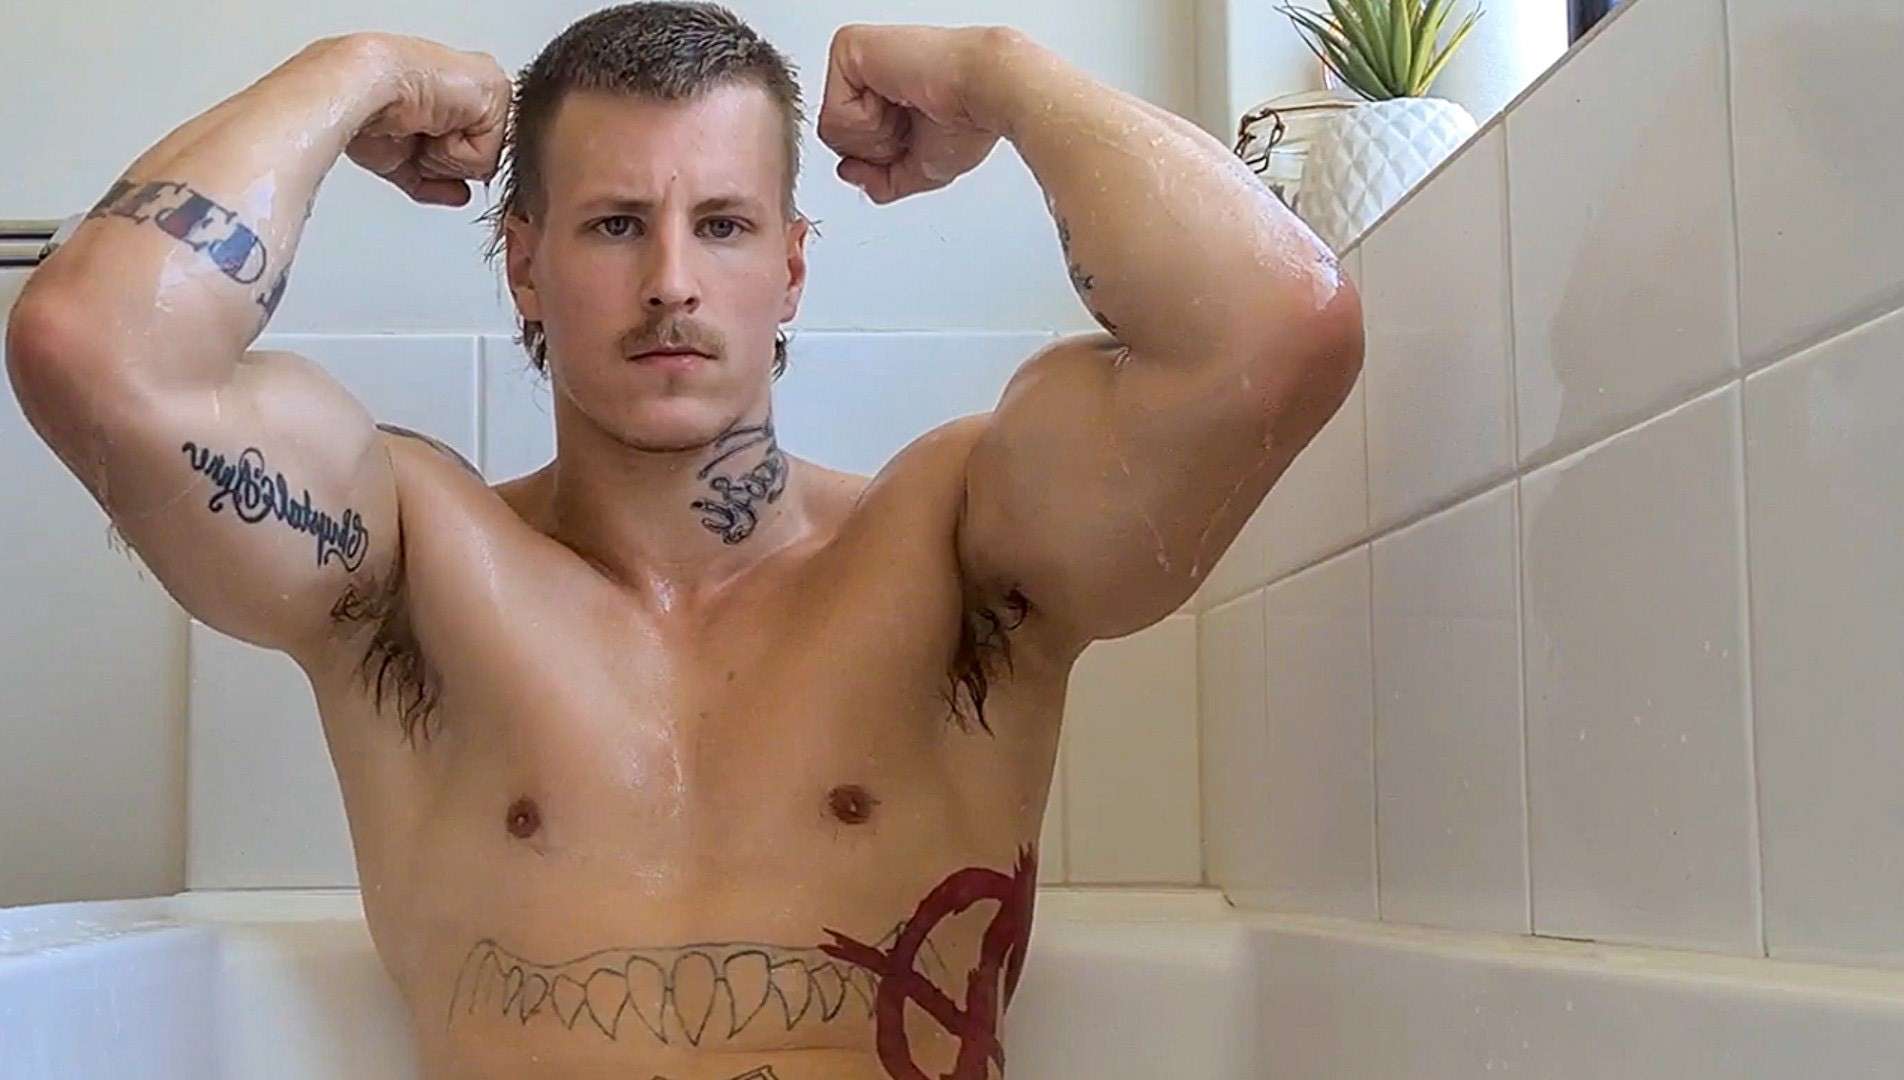 Alec Nysten turned to an OnlyFans explicit porn account to provide a family income, but image theft now threatens to ruin it photo picture